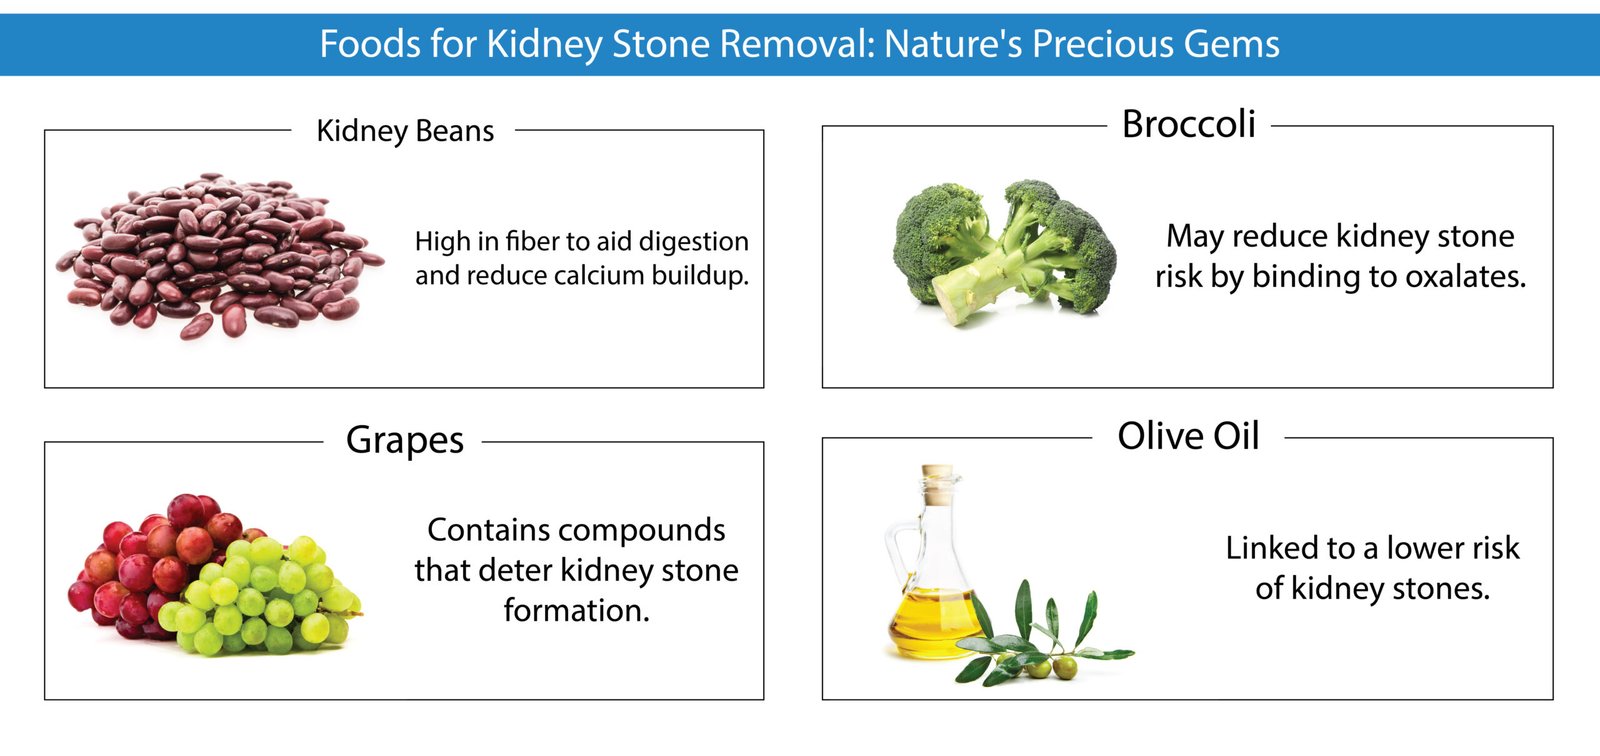 Top Foods for Kidney Stone Removal